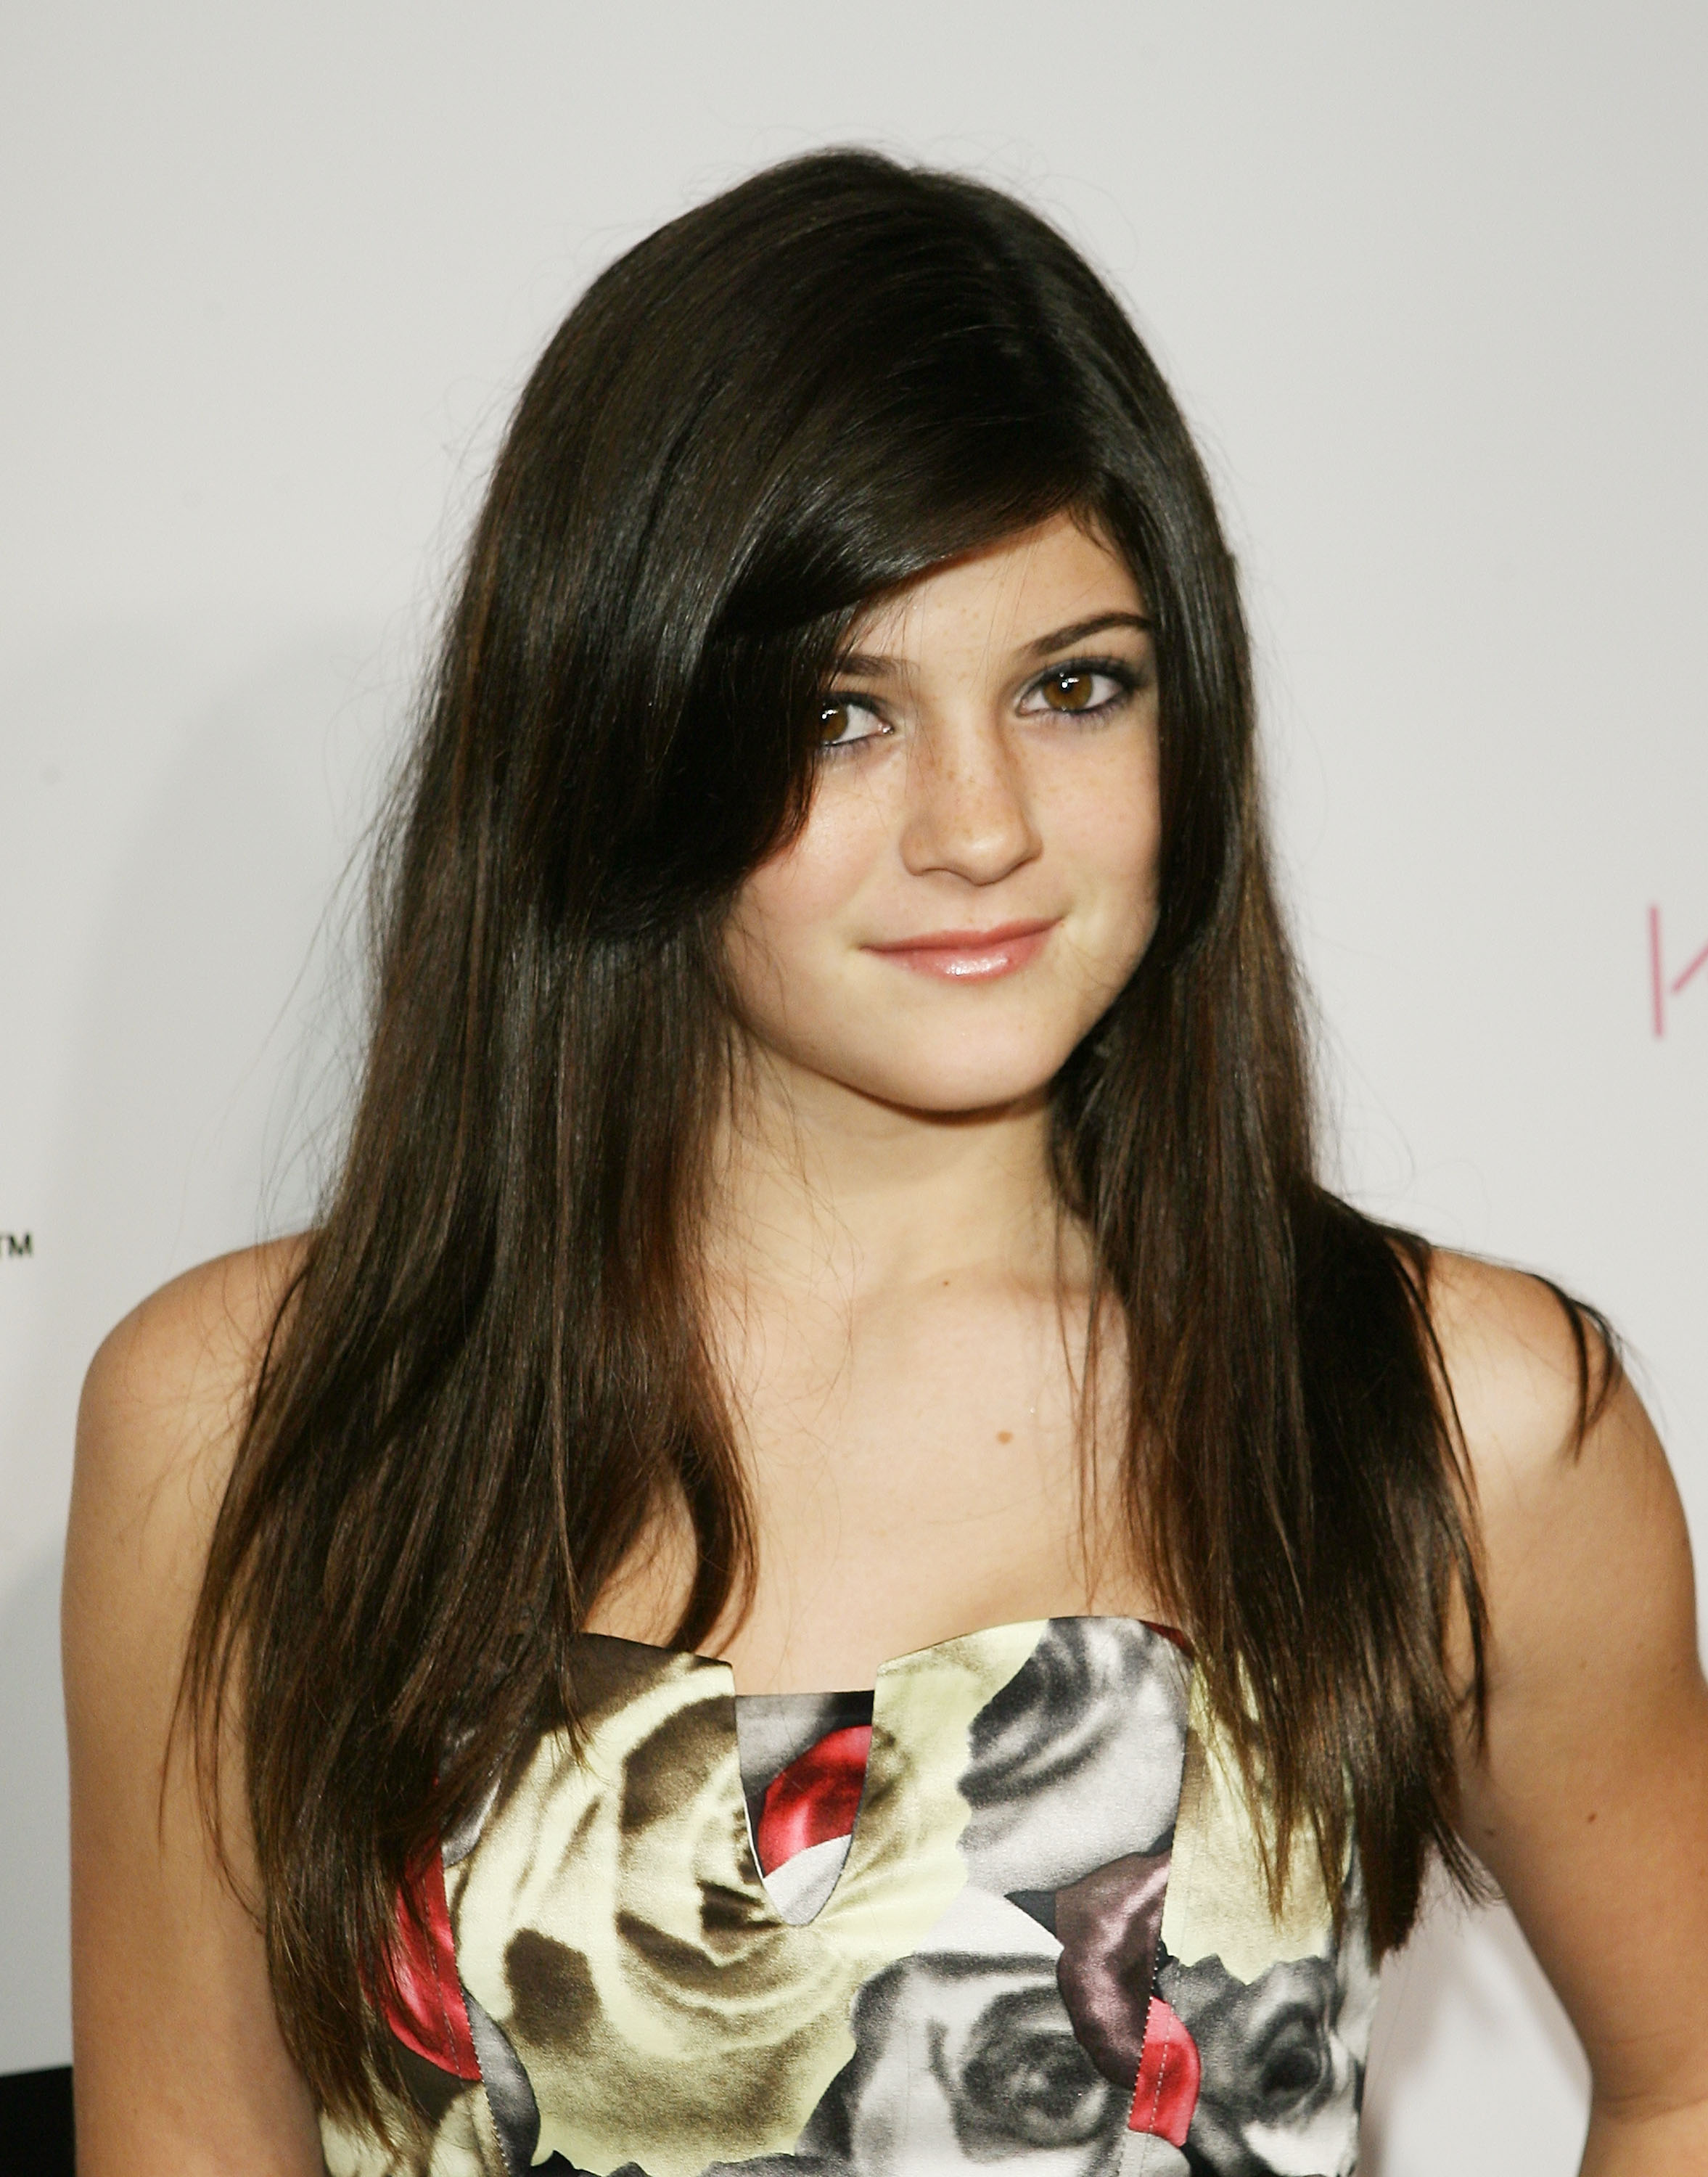 Kylie Jenner arrives to the "Kiss & Tell" record release party at Siren Studios on September 29, 2009 in Hollywood, California. | Source: Getty Images